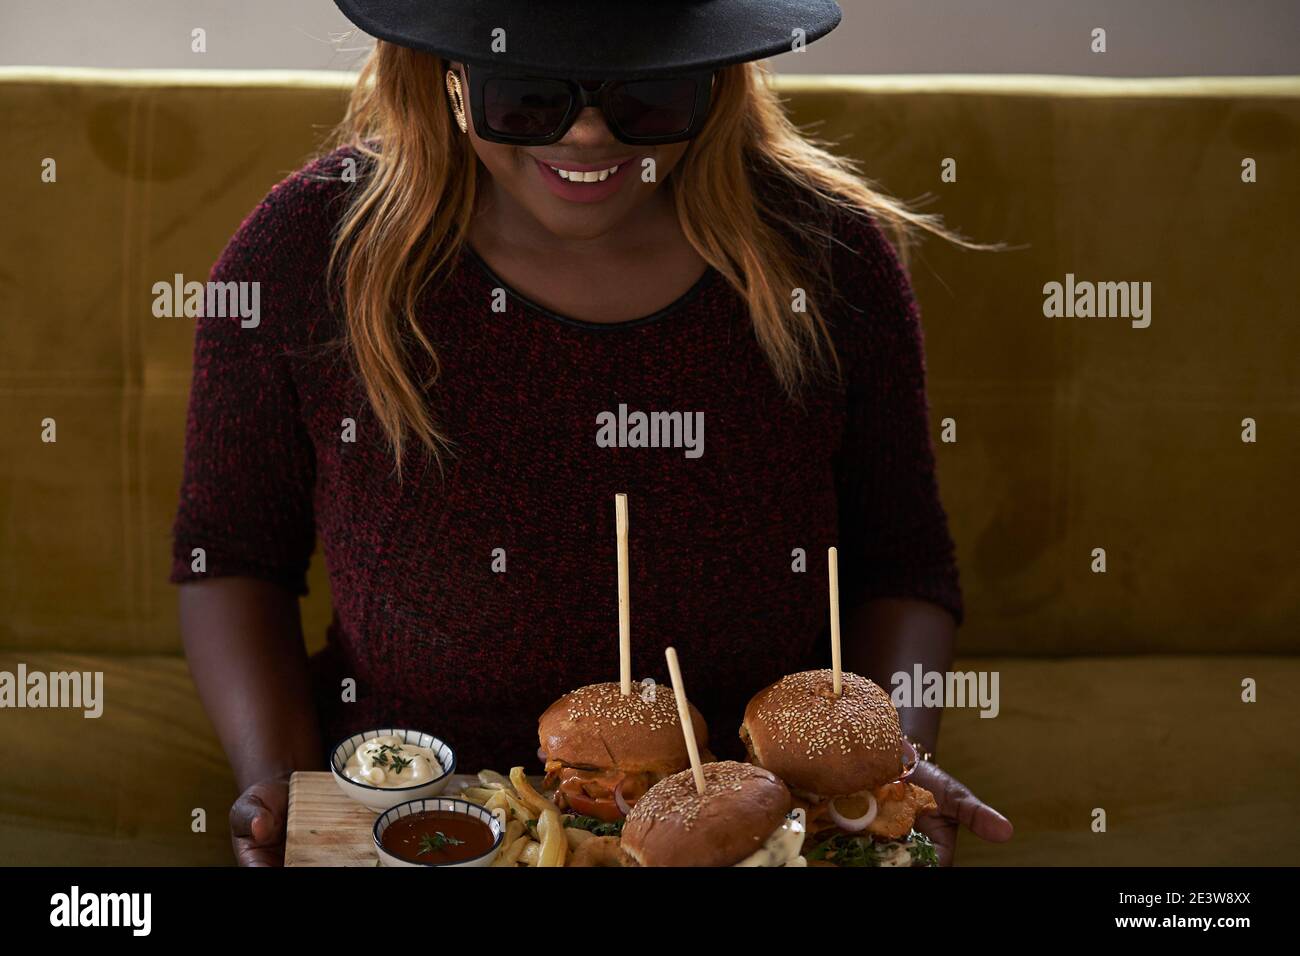 Faith Ngwenya, The hat and shades chef and owner of the Deluxe Burger Joint. Stock Photo